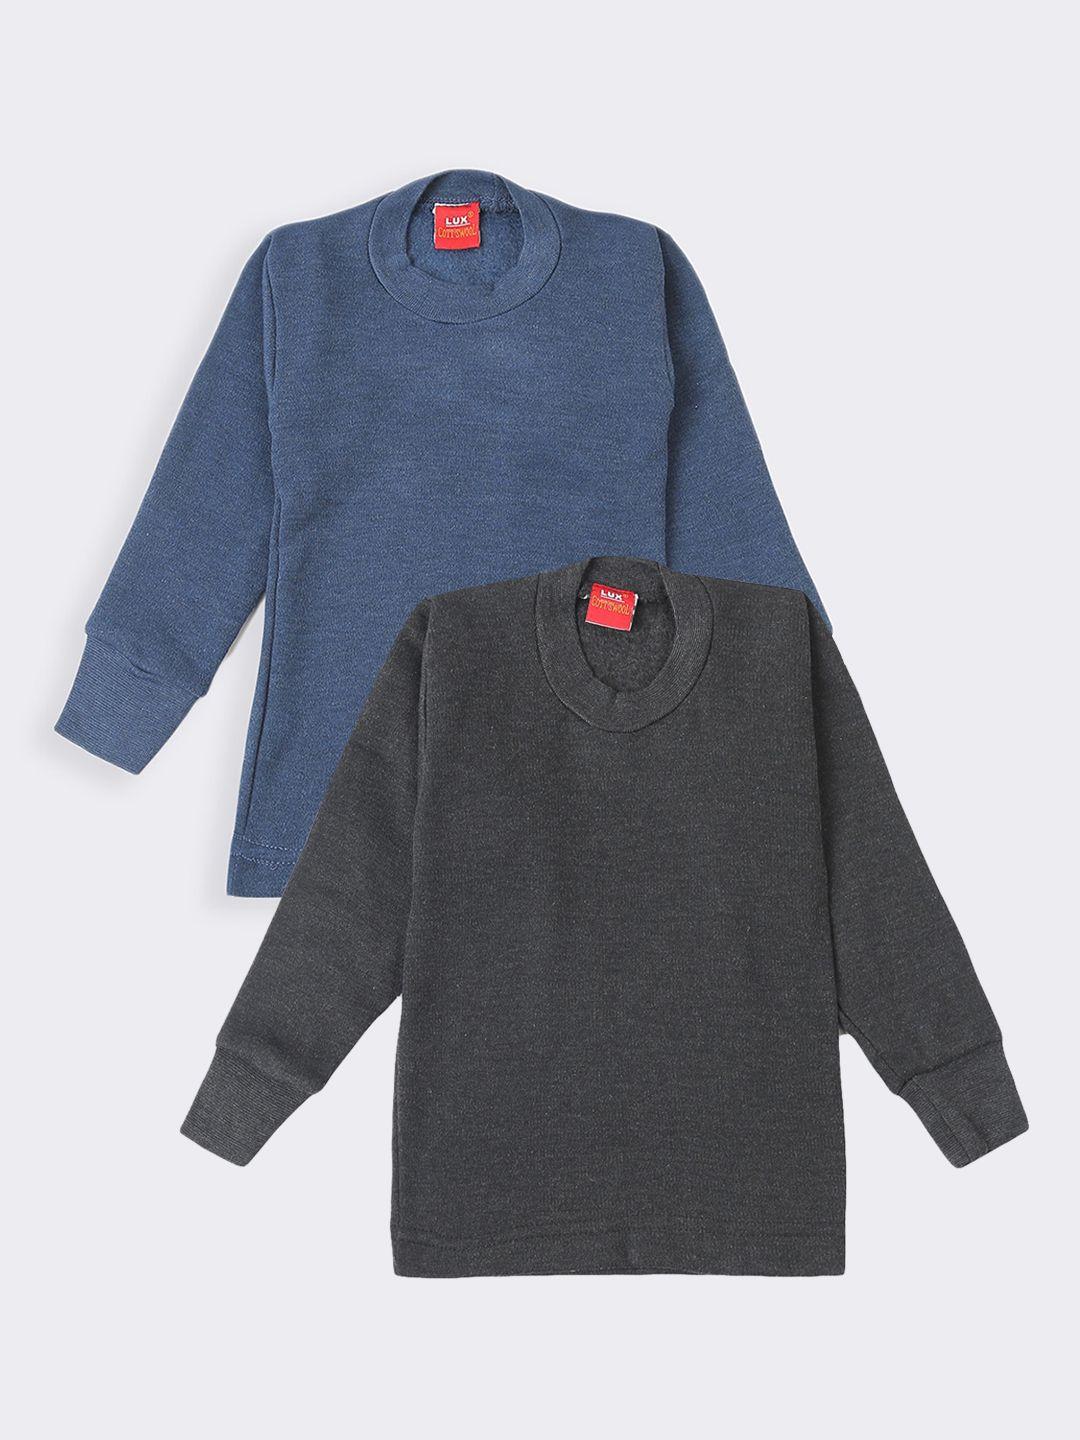 lux cottswool boys set of 2 black & blue solid cotton thermal tops